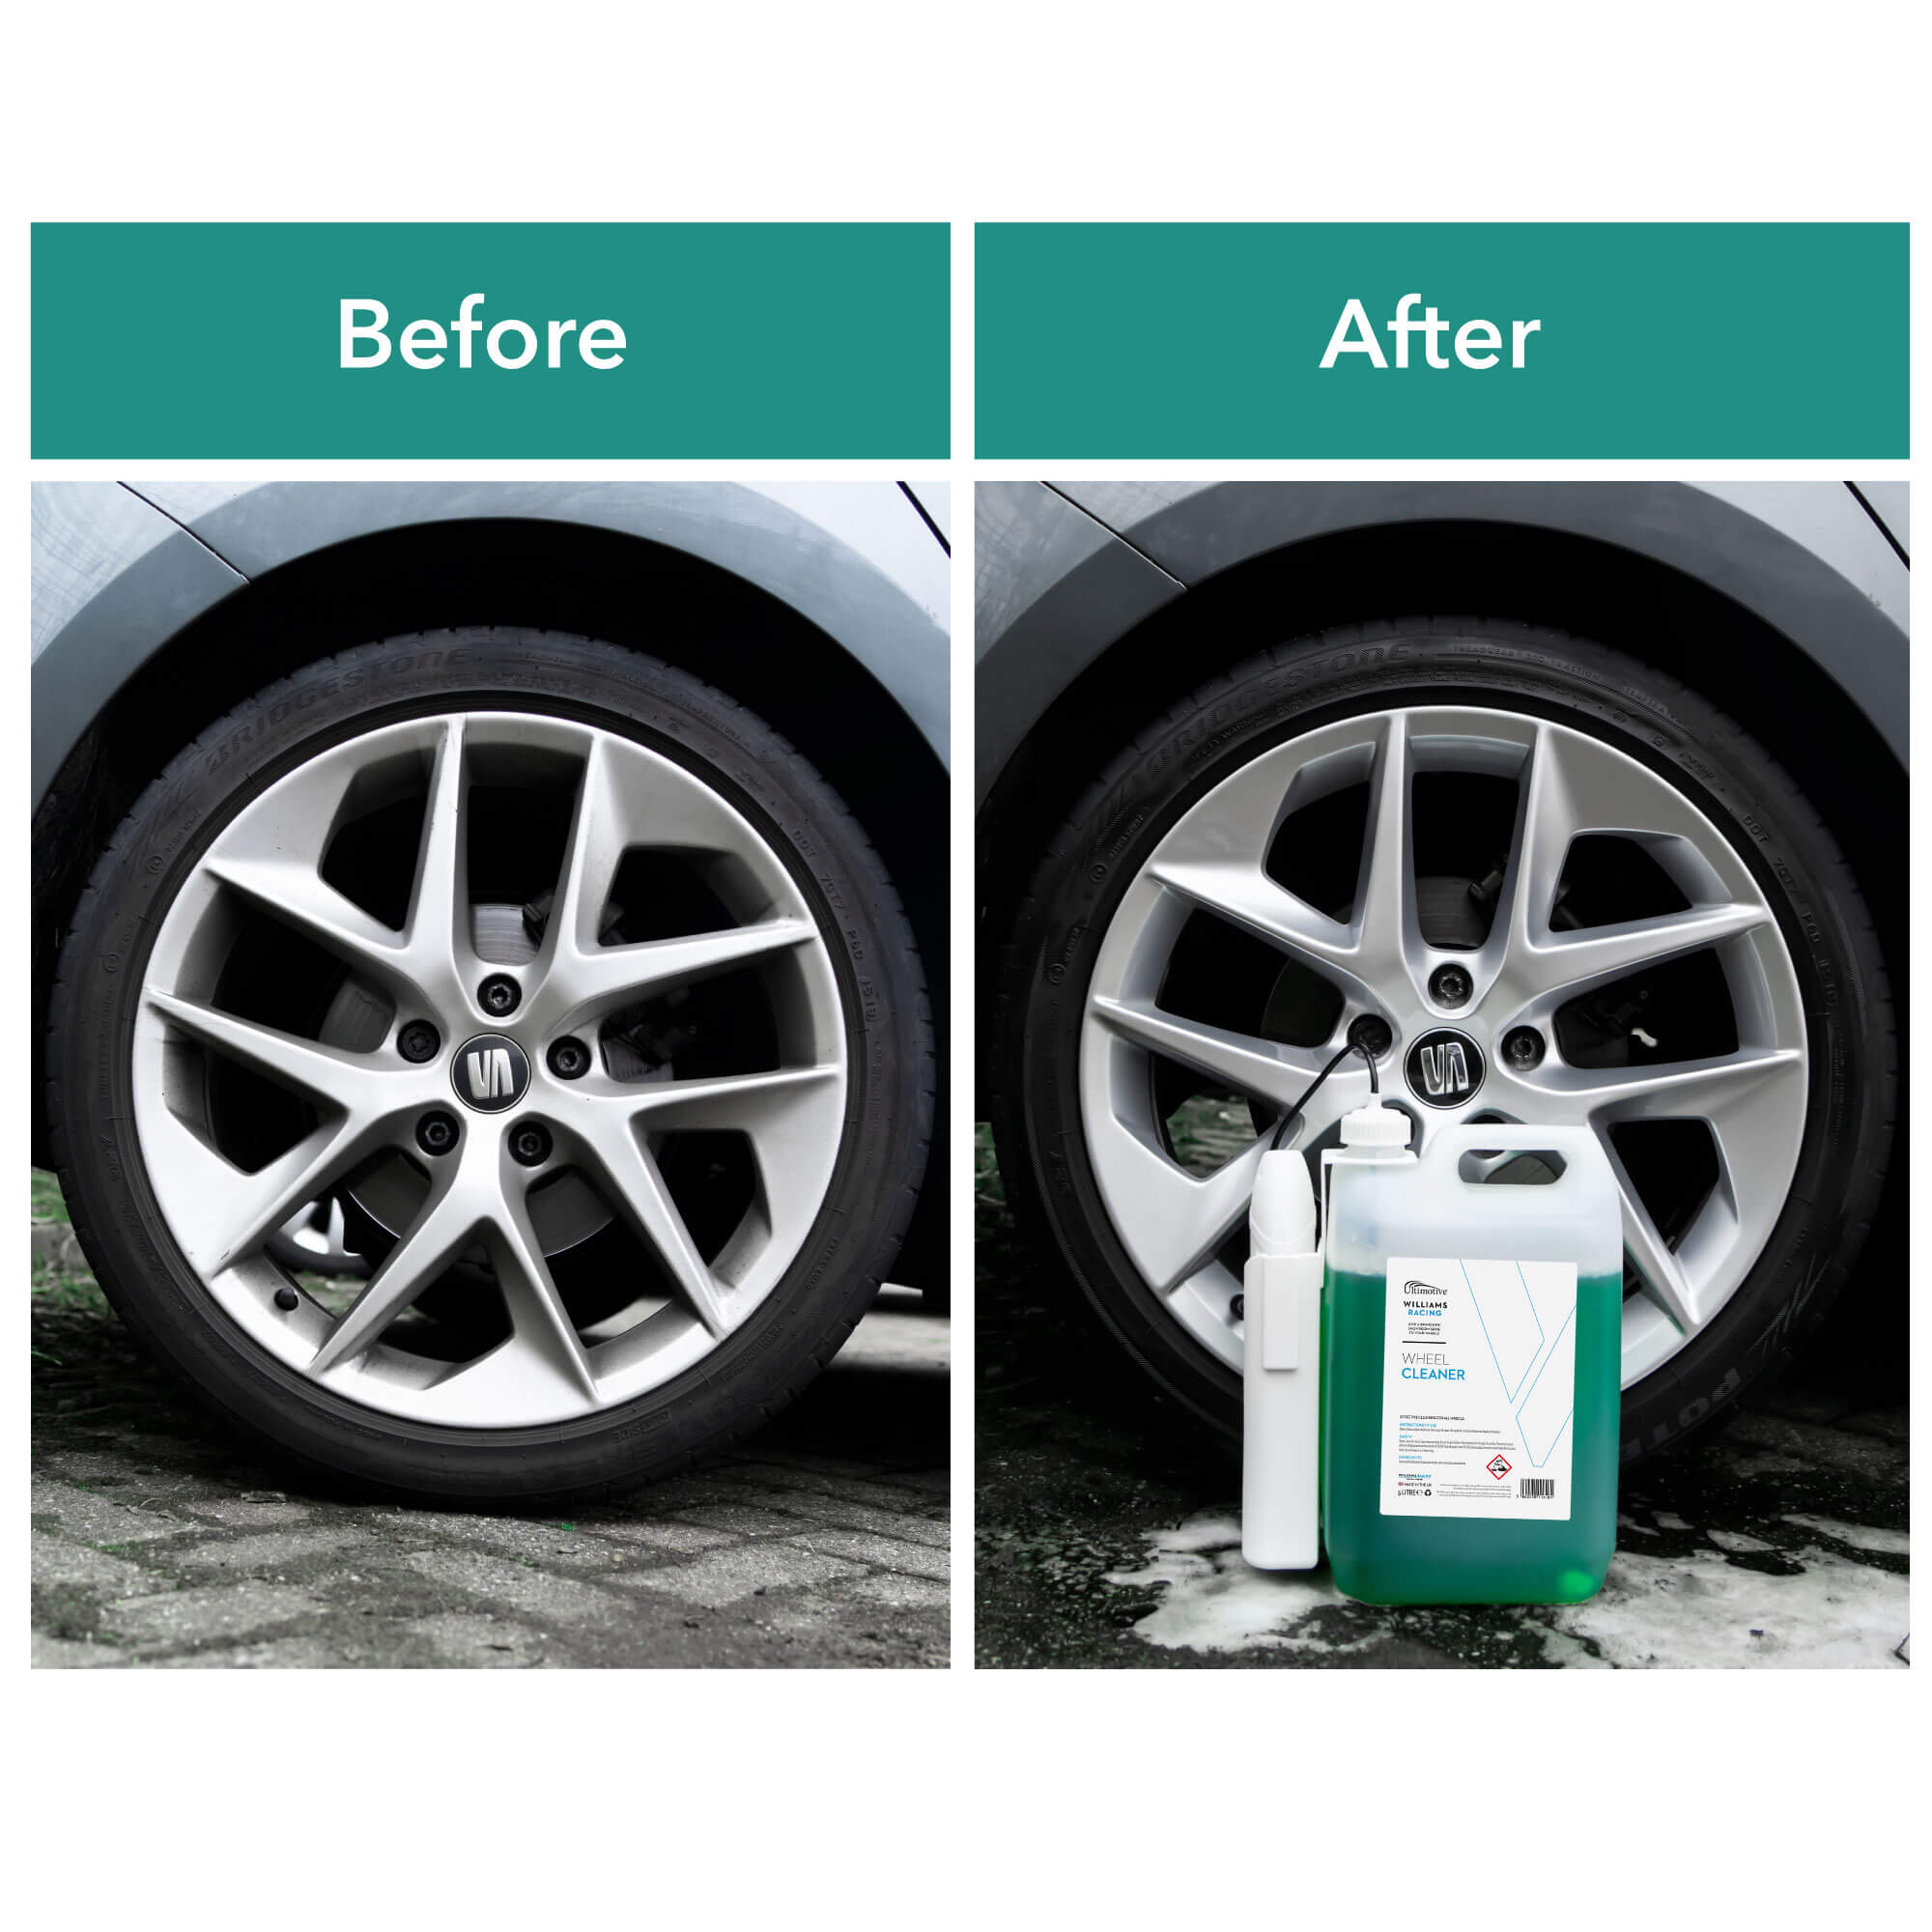 Before and after using Williams Wheel Cleaner